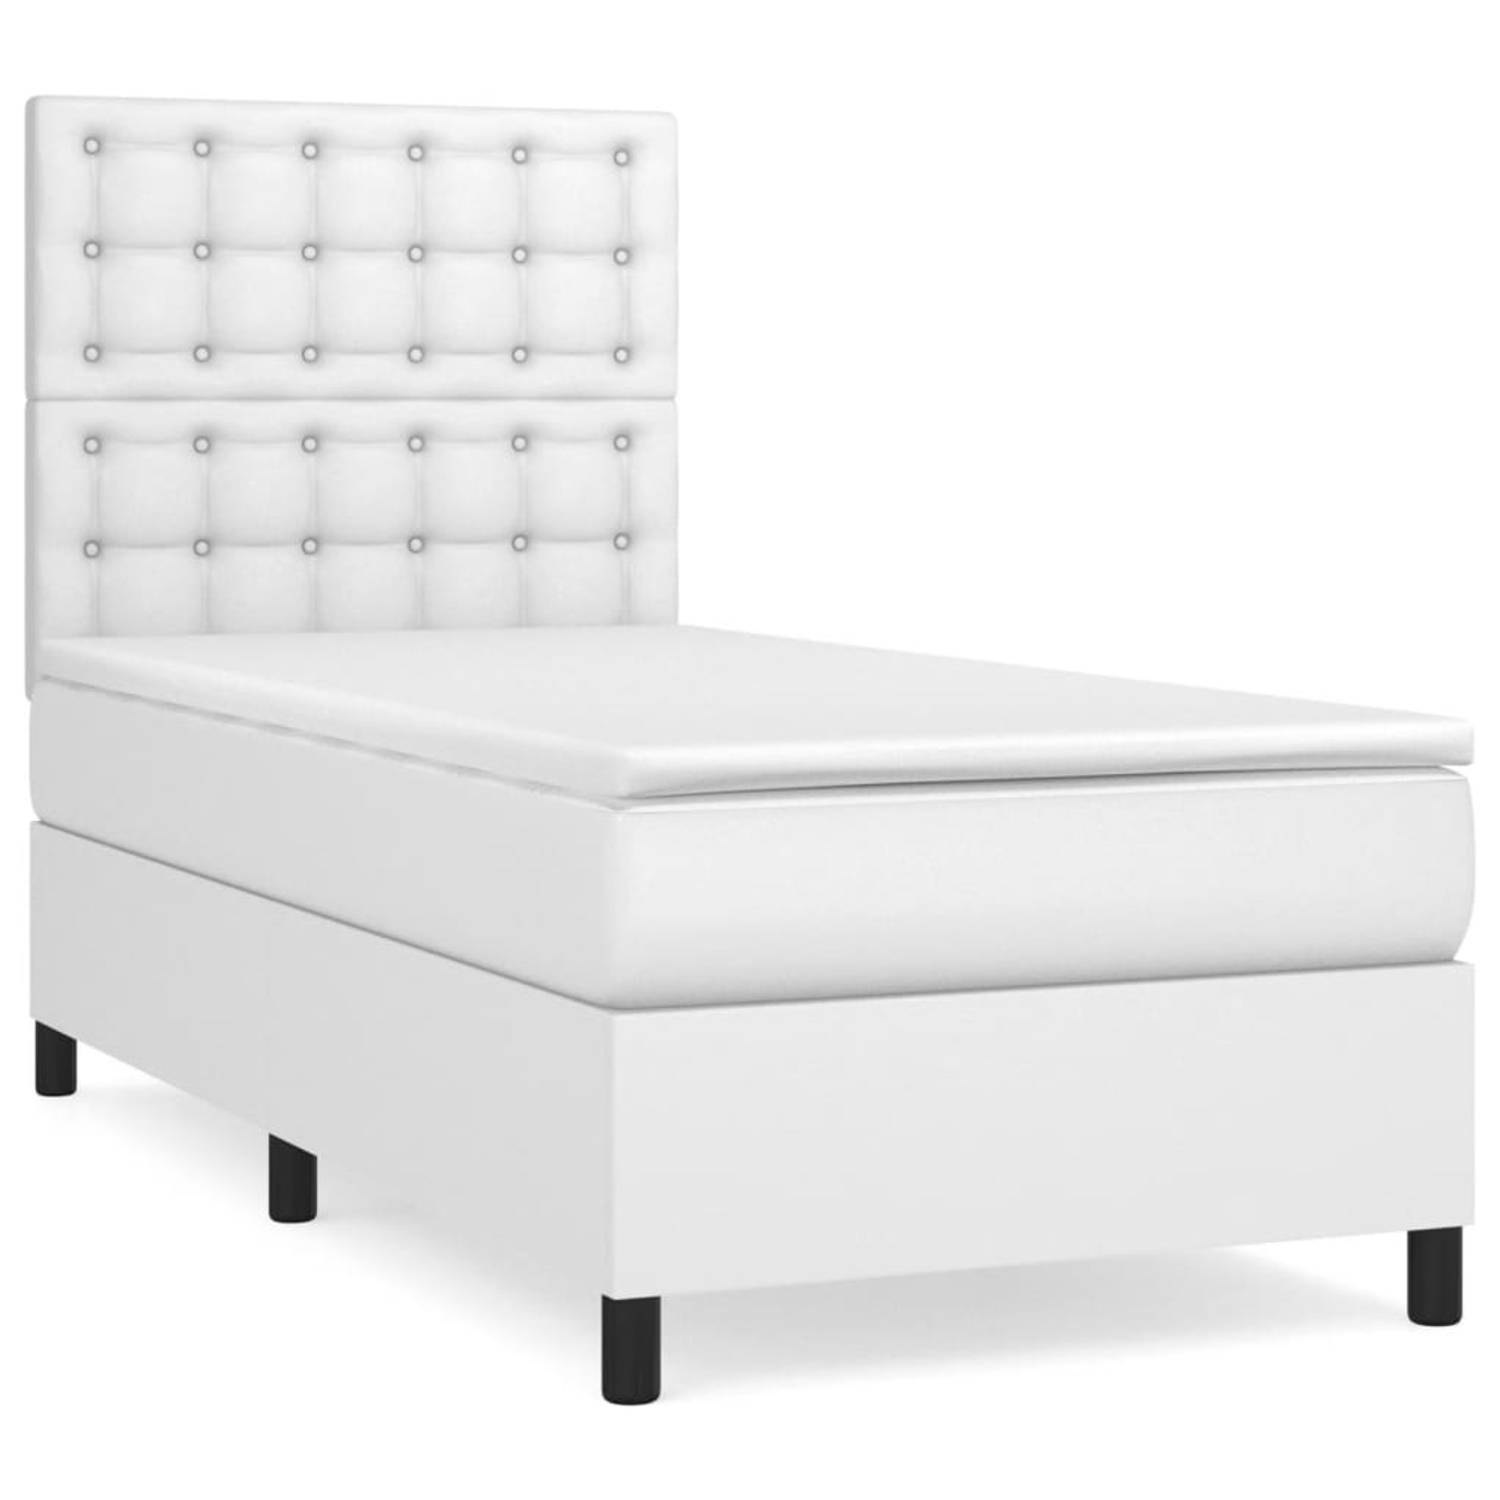 The Living Store Bedframe - The Living Store - Boxspringbed - 203x100x118/128 cm - Duurzaam kunstleer